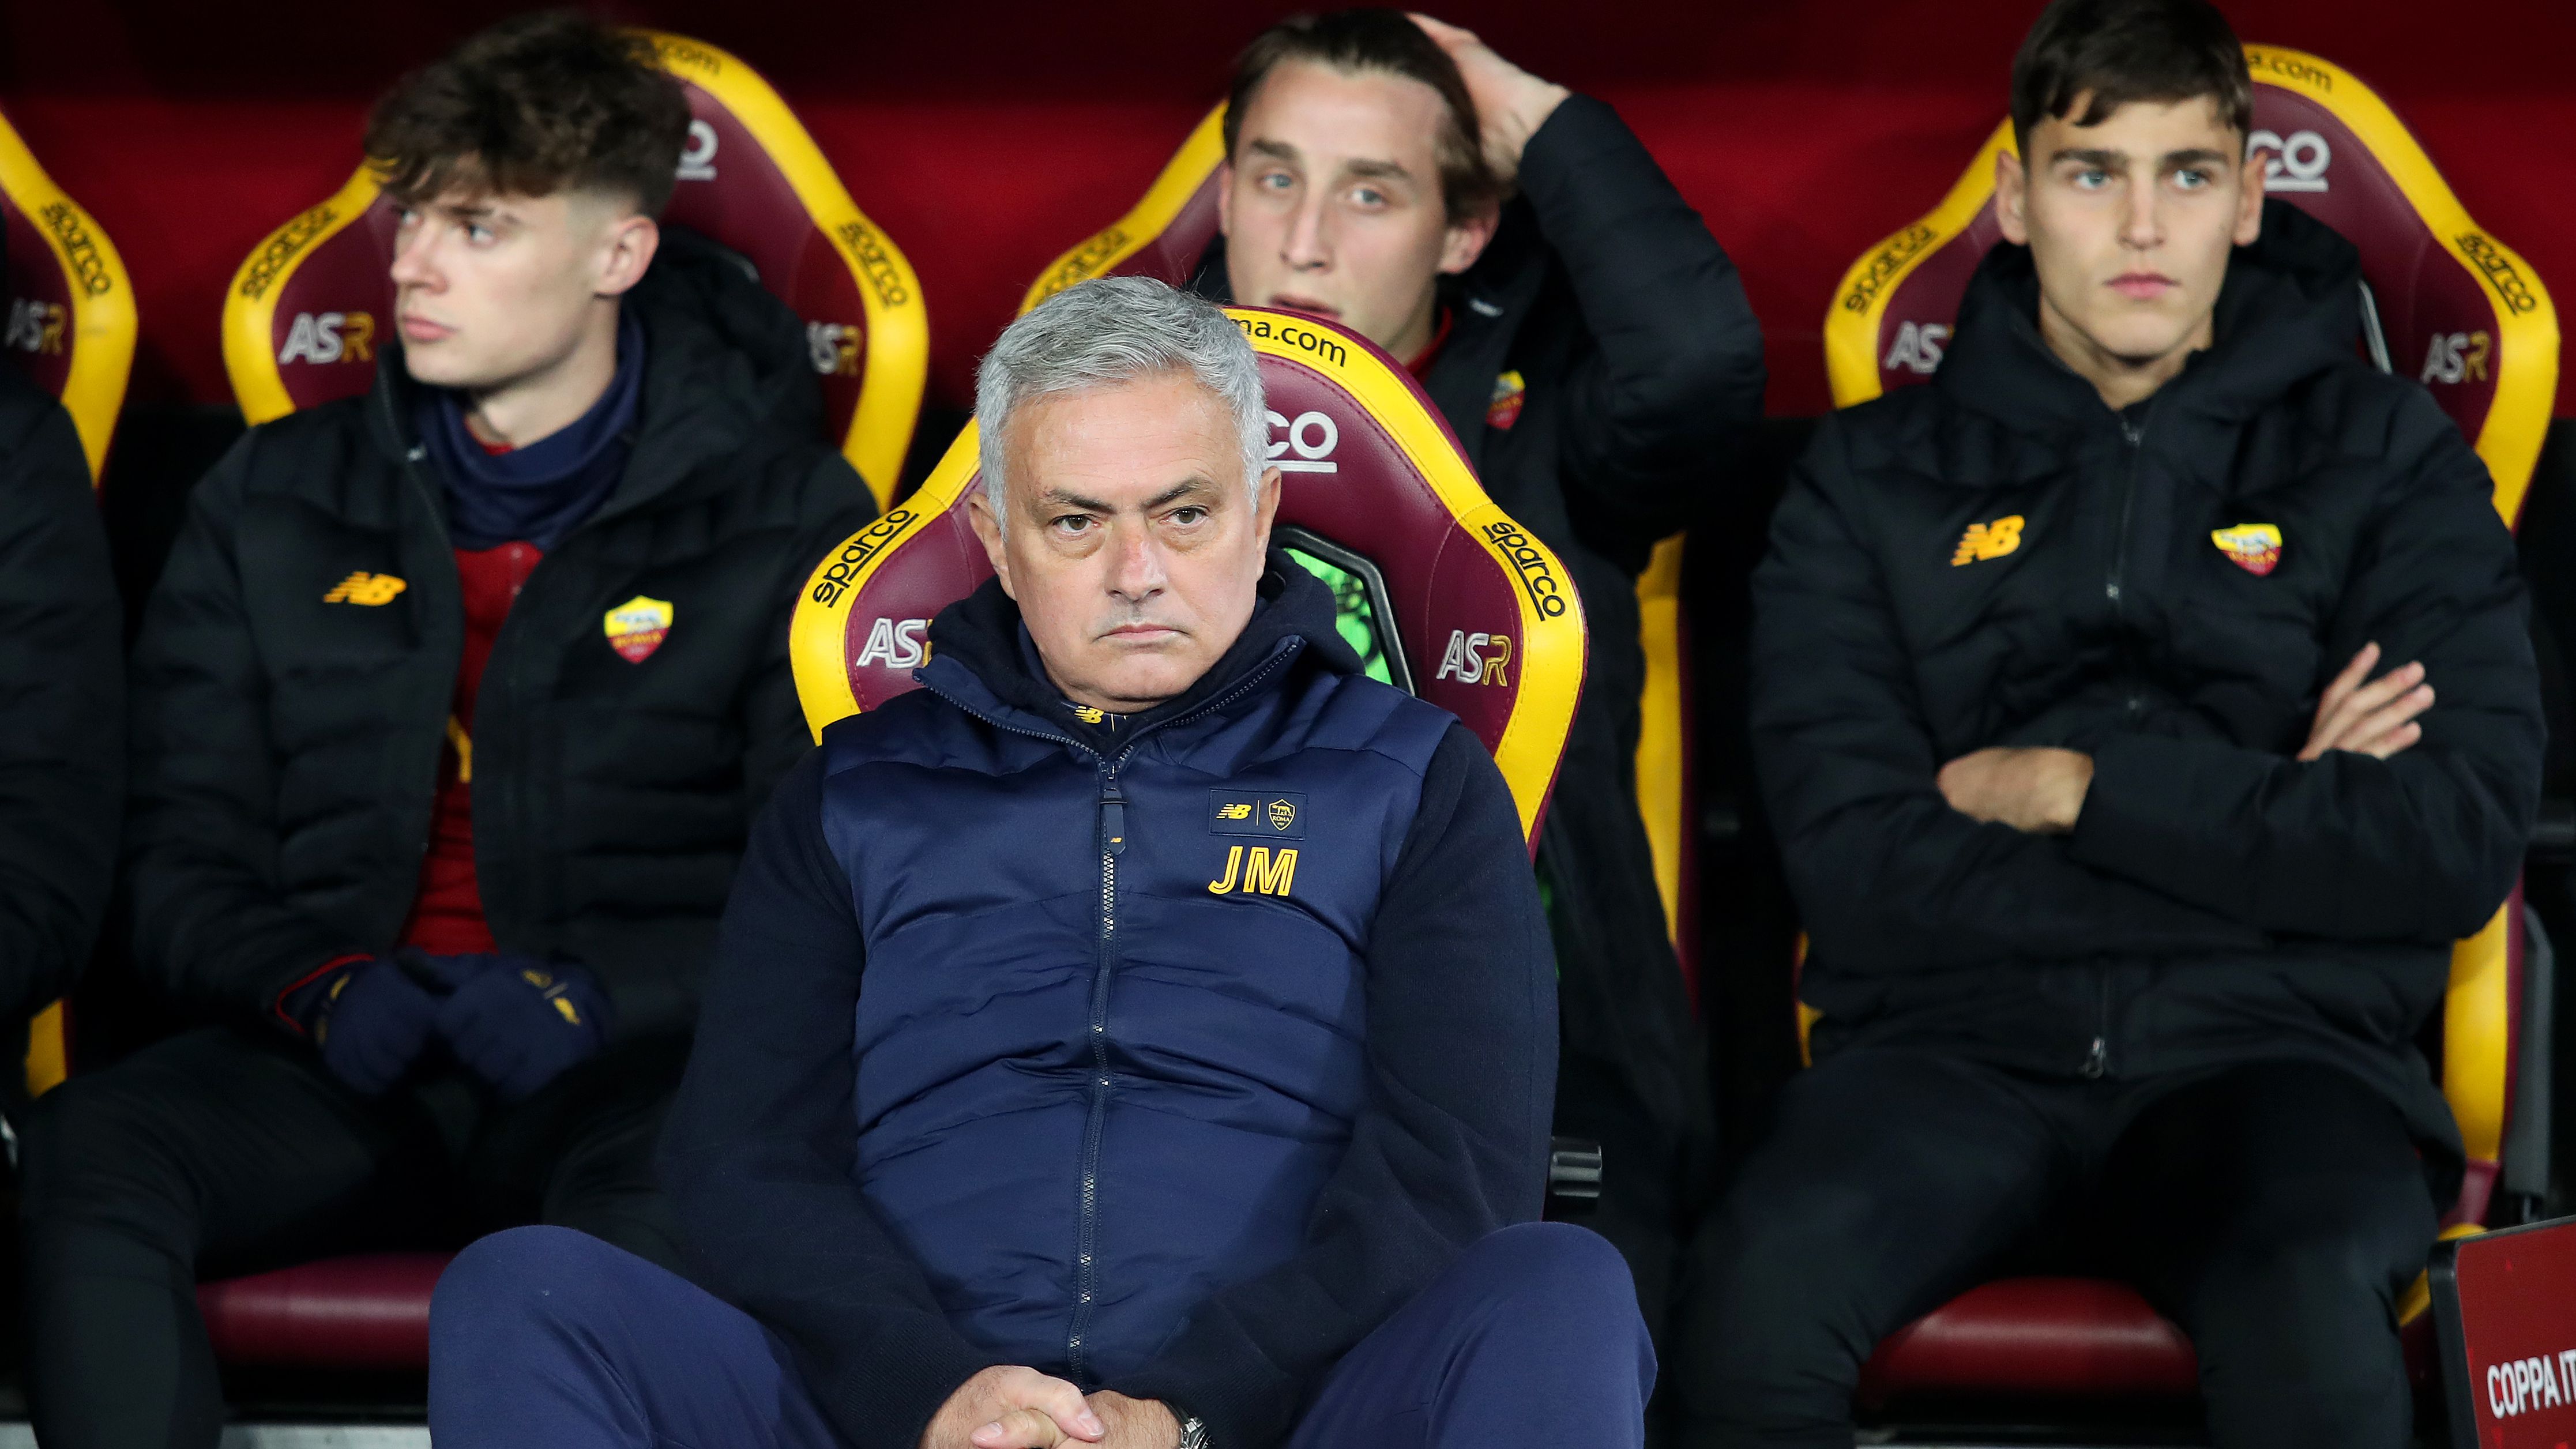 José Mourinho's Roma were in a difficult situation to qualify for the Champions League (Credit: Getty Images)